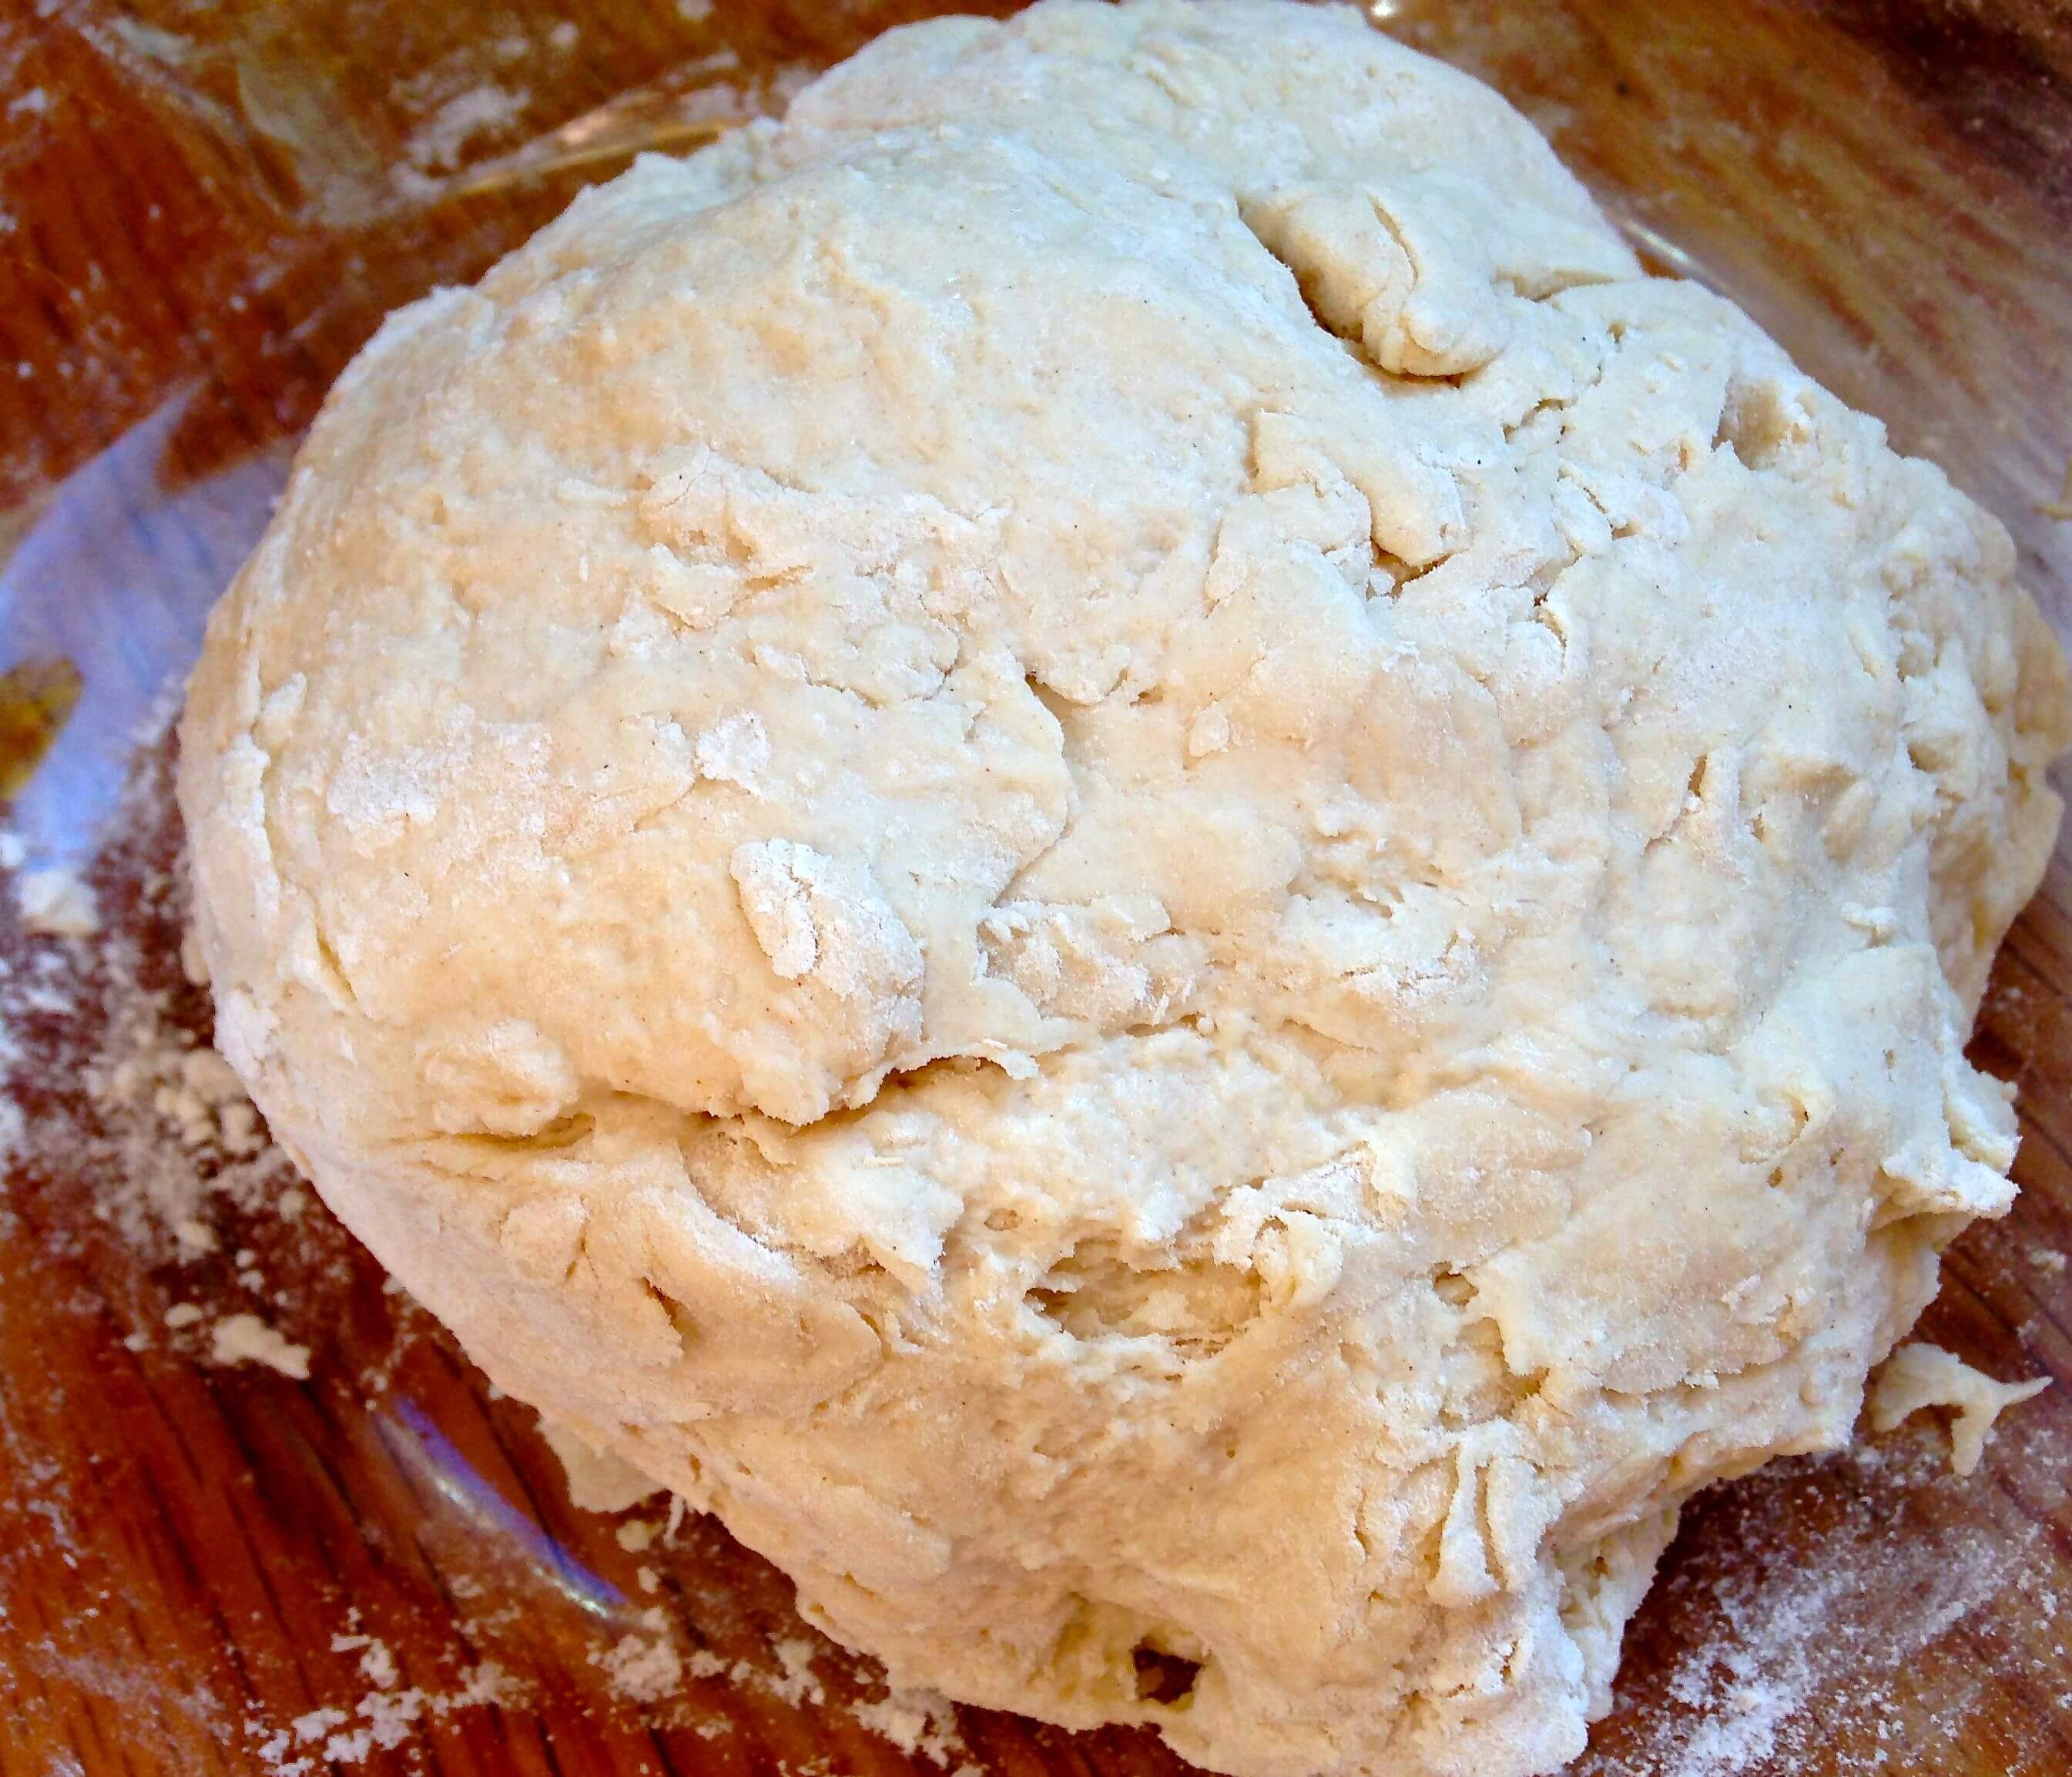 A ball of raw bread dough sitting in a glass bowl.